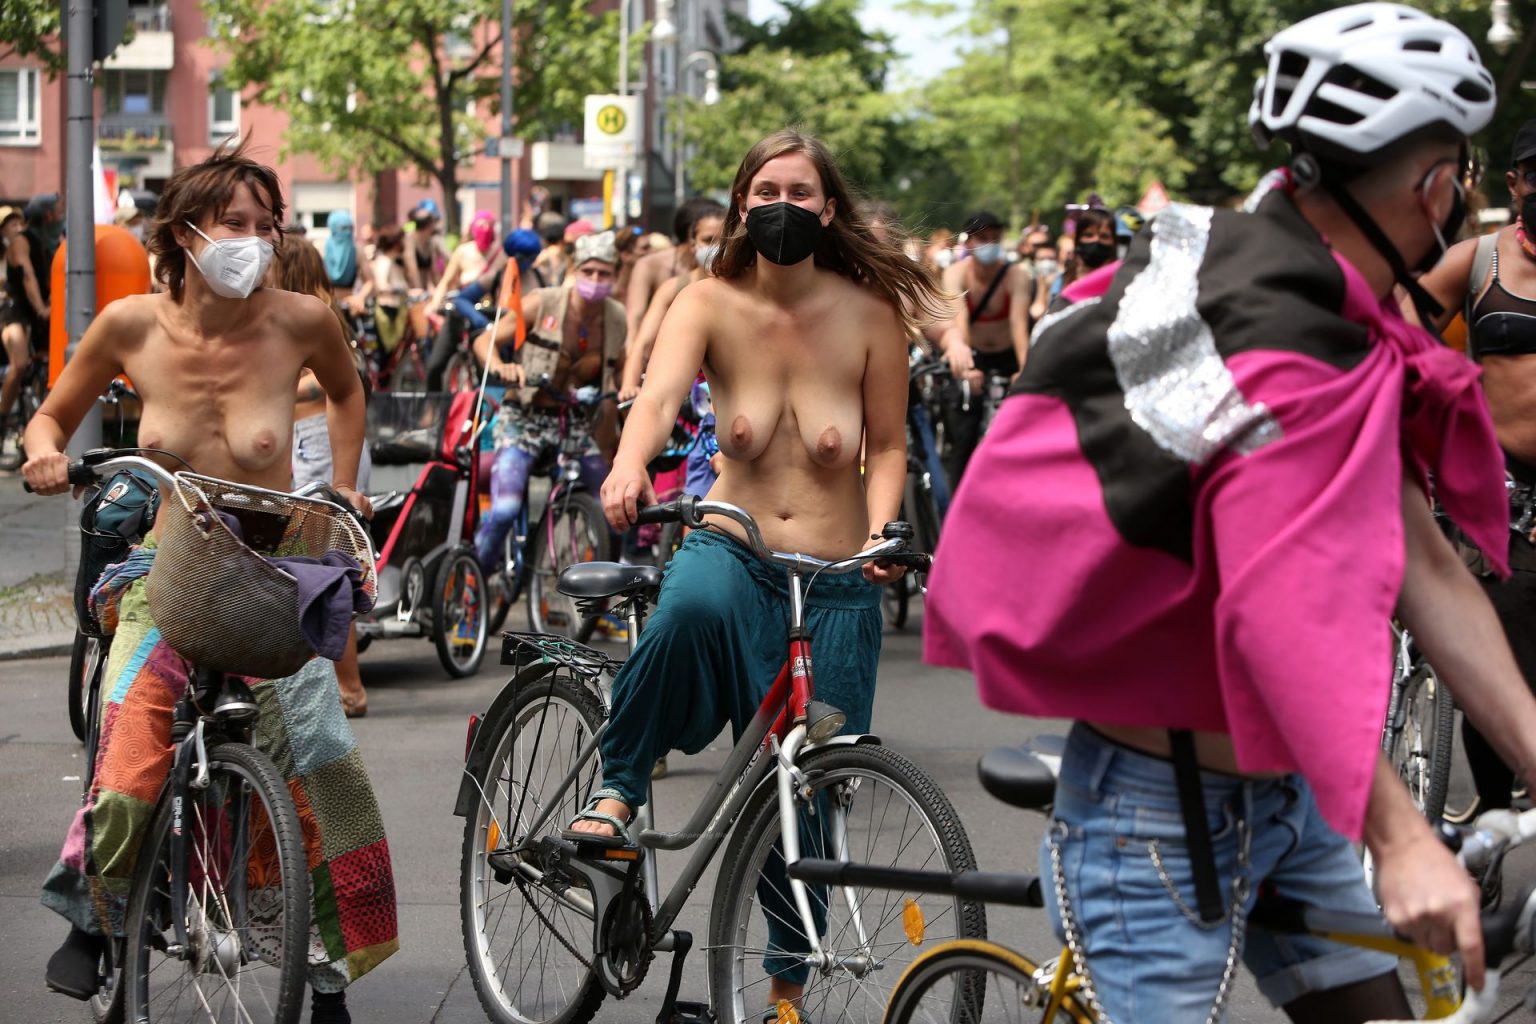 Women Hold Topless Protest For Equal Rights 64 Photos [updated] Thefappening